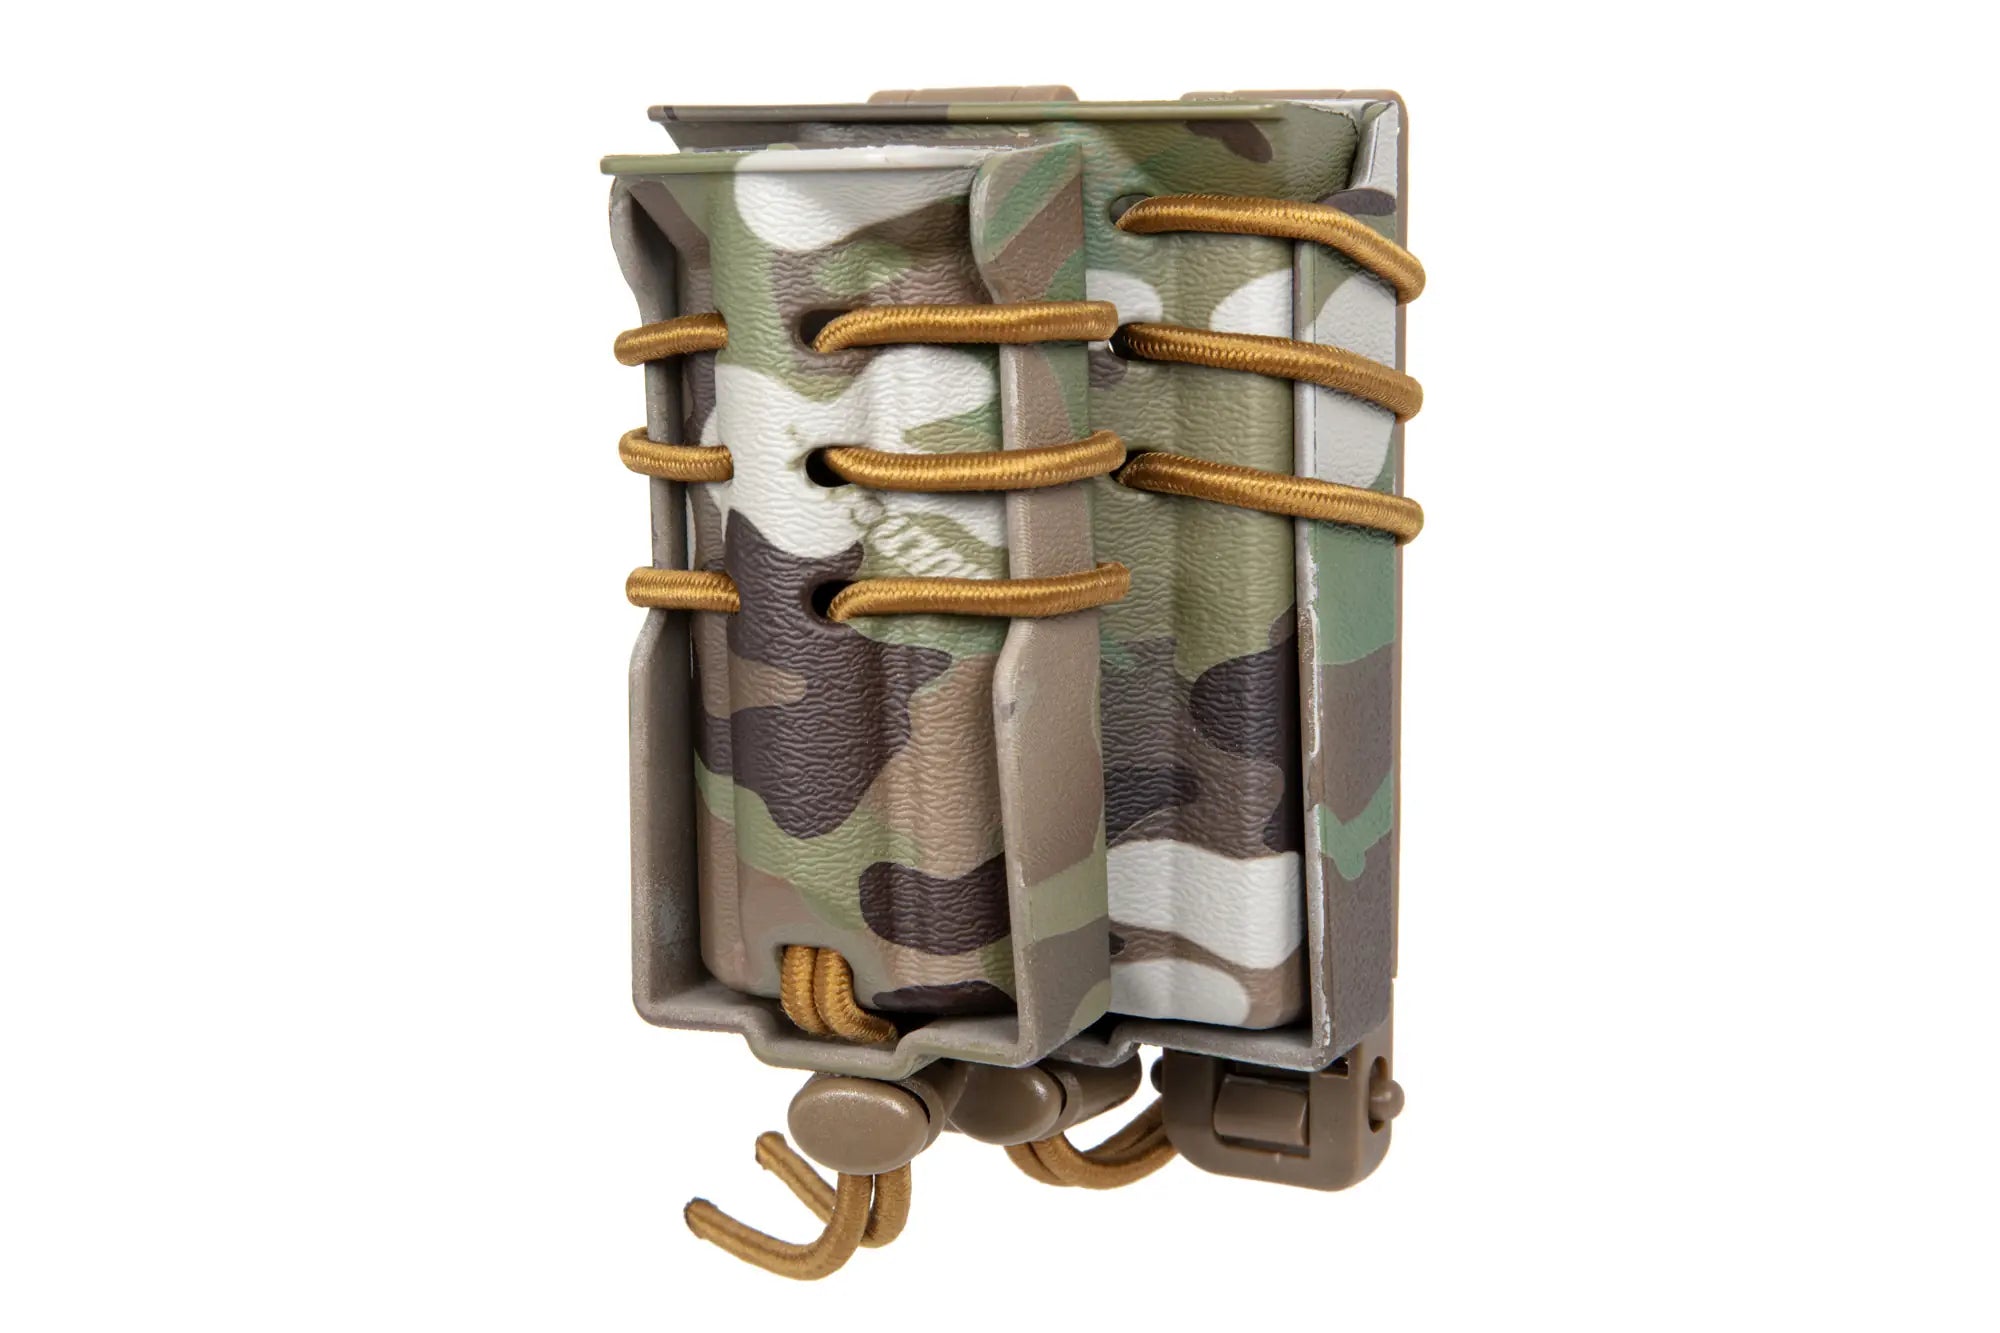 Carrier for 2 M4/M16 and 9mm magazines Wosport Urban Assault Quick Pull Multicam